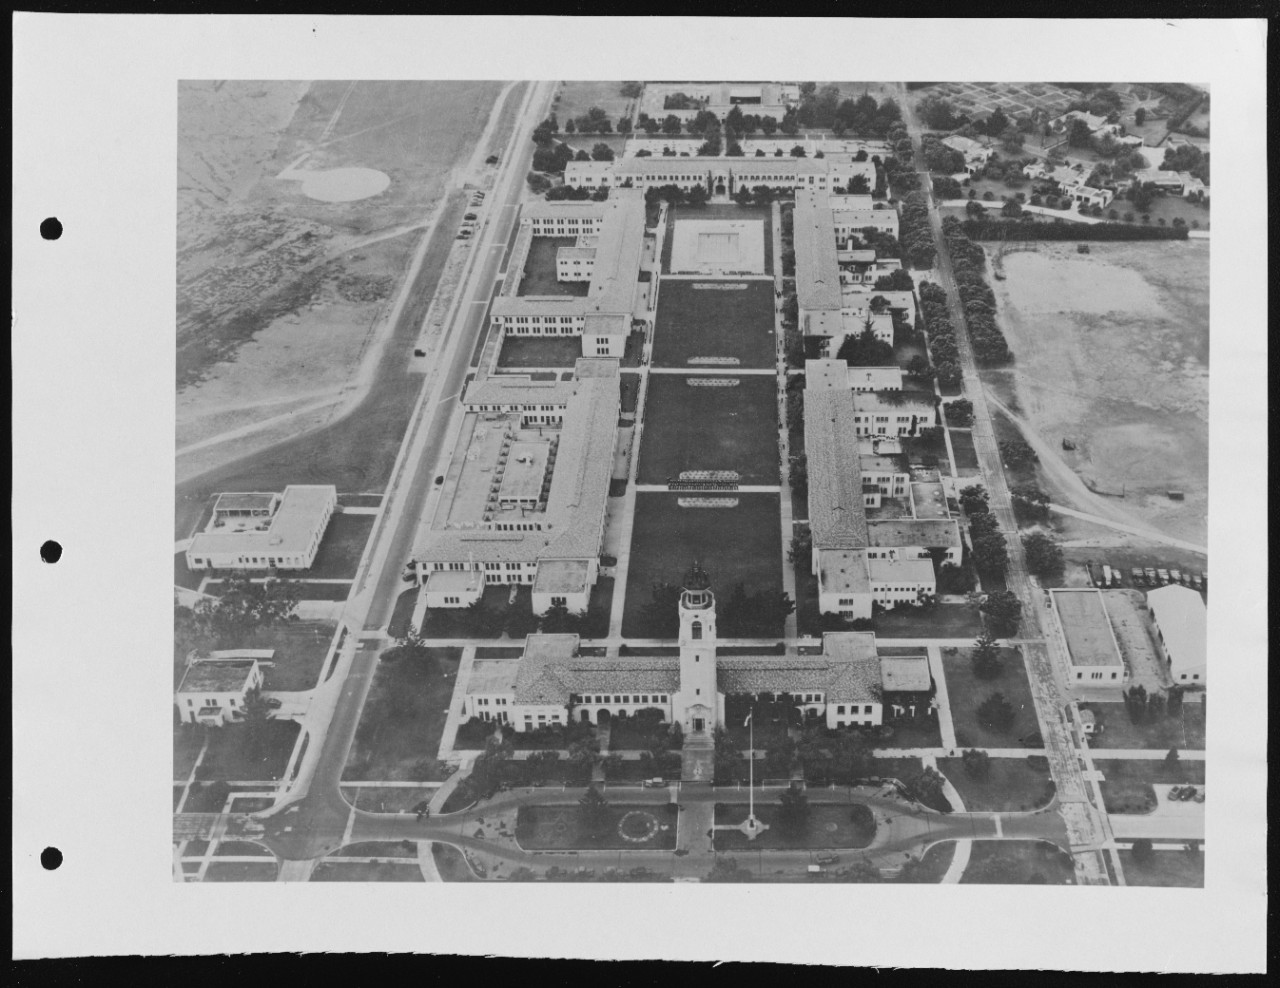 Naval Air Station San Diego Administration Building and barracks